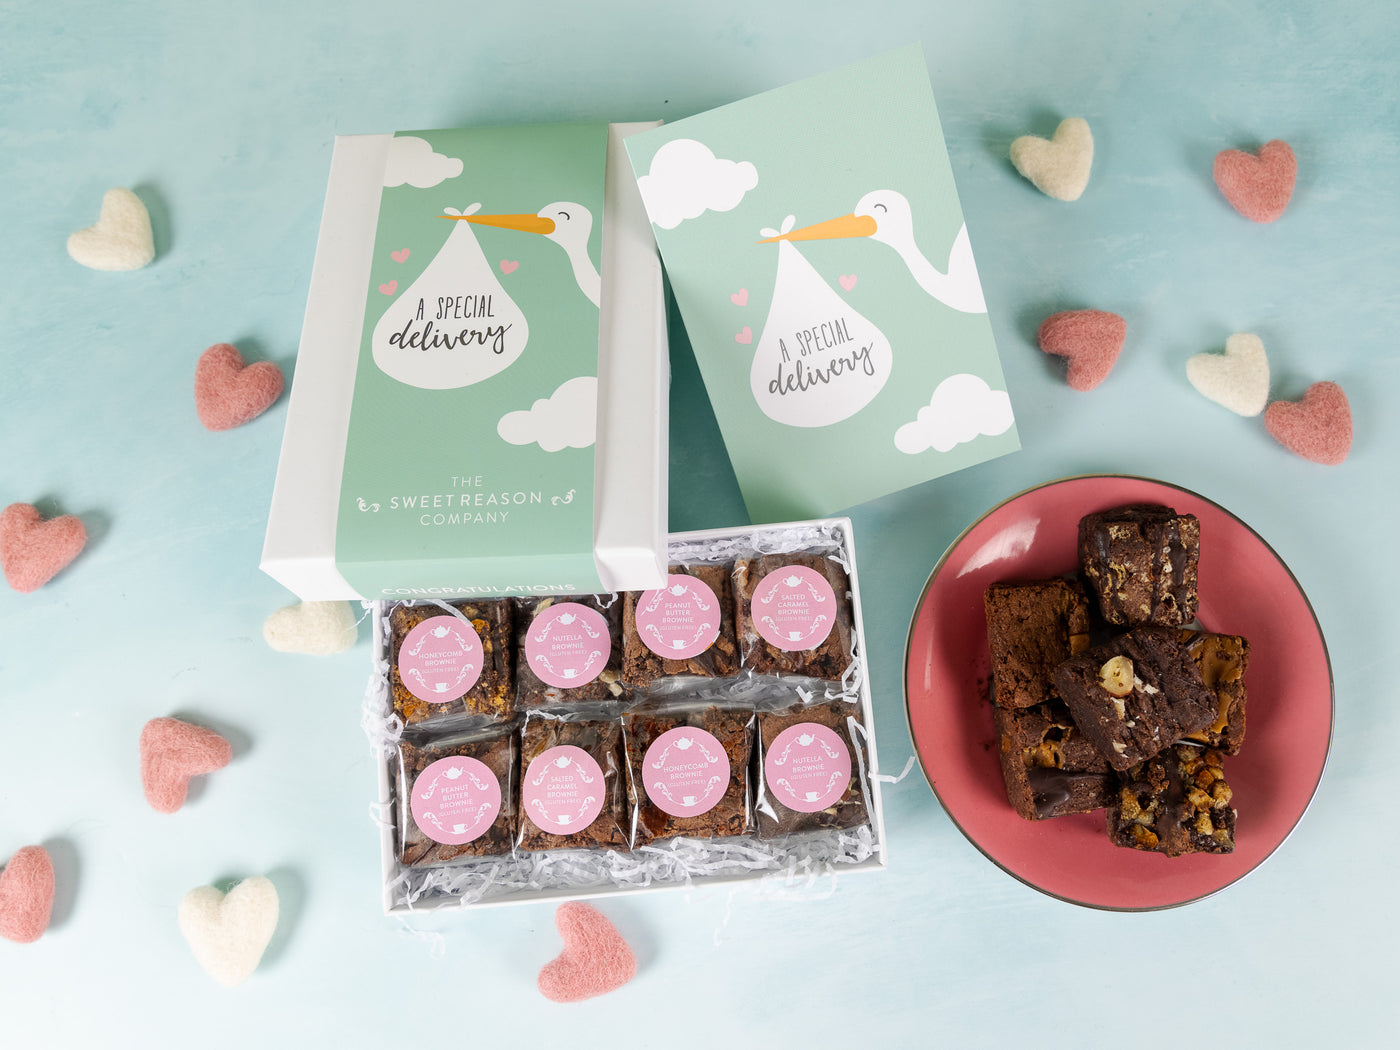 'A Special Delivery' Gluten Free Luxury Brownie Gift